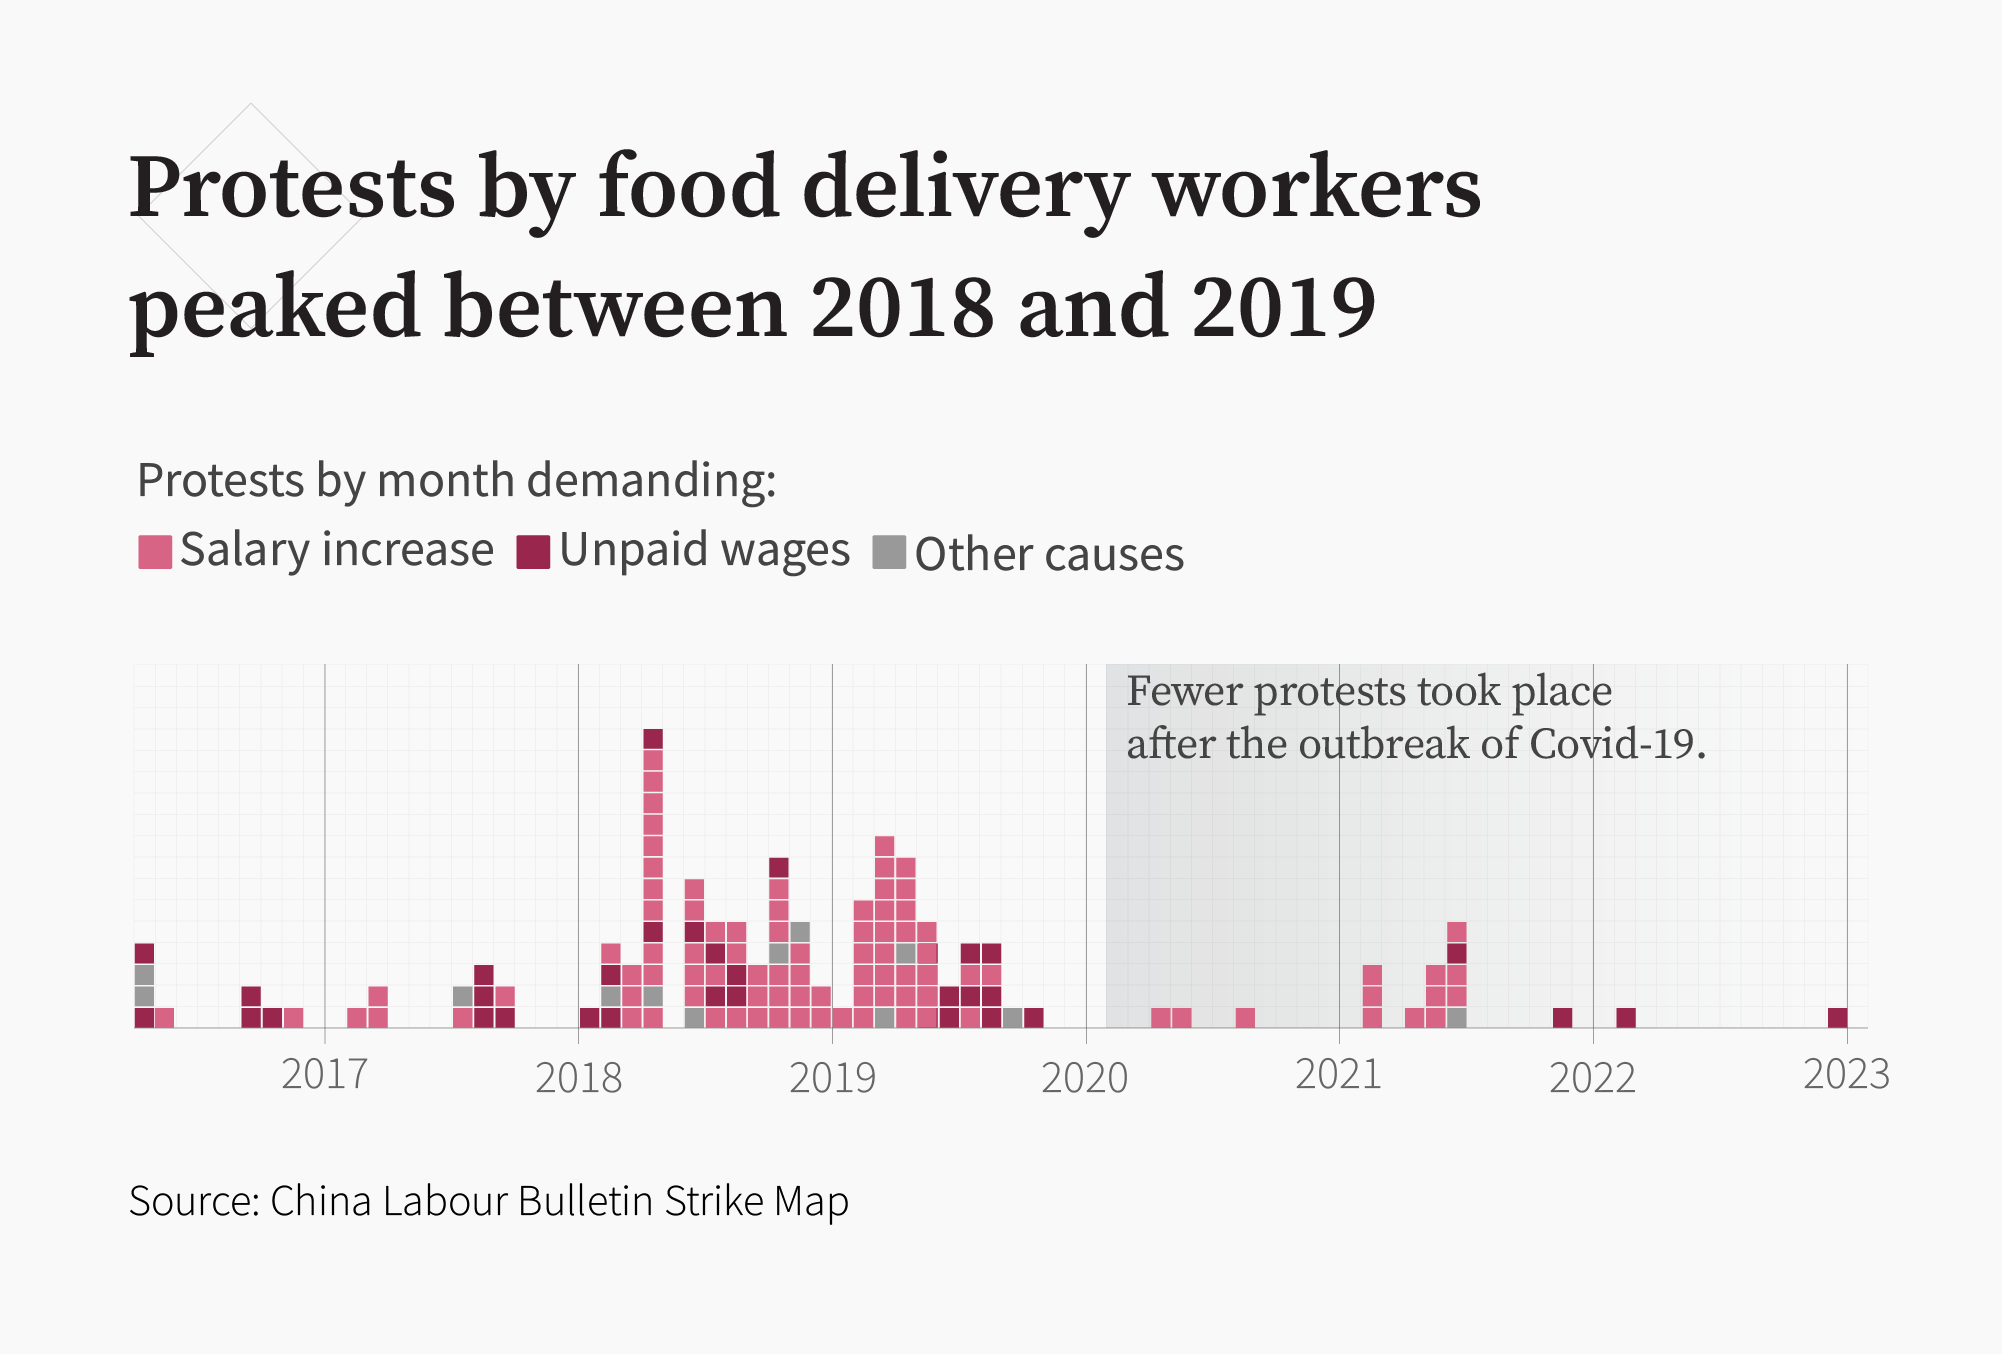 A CLB graphic shows CLB Strike Map data on protests by food deliver riders between 2016 and early 2023